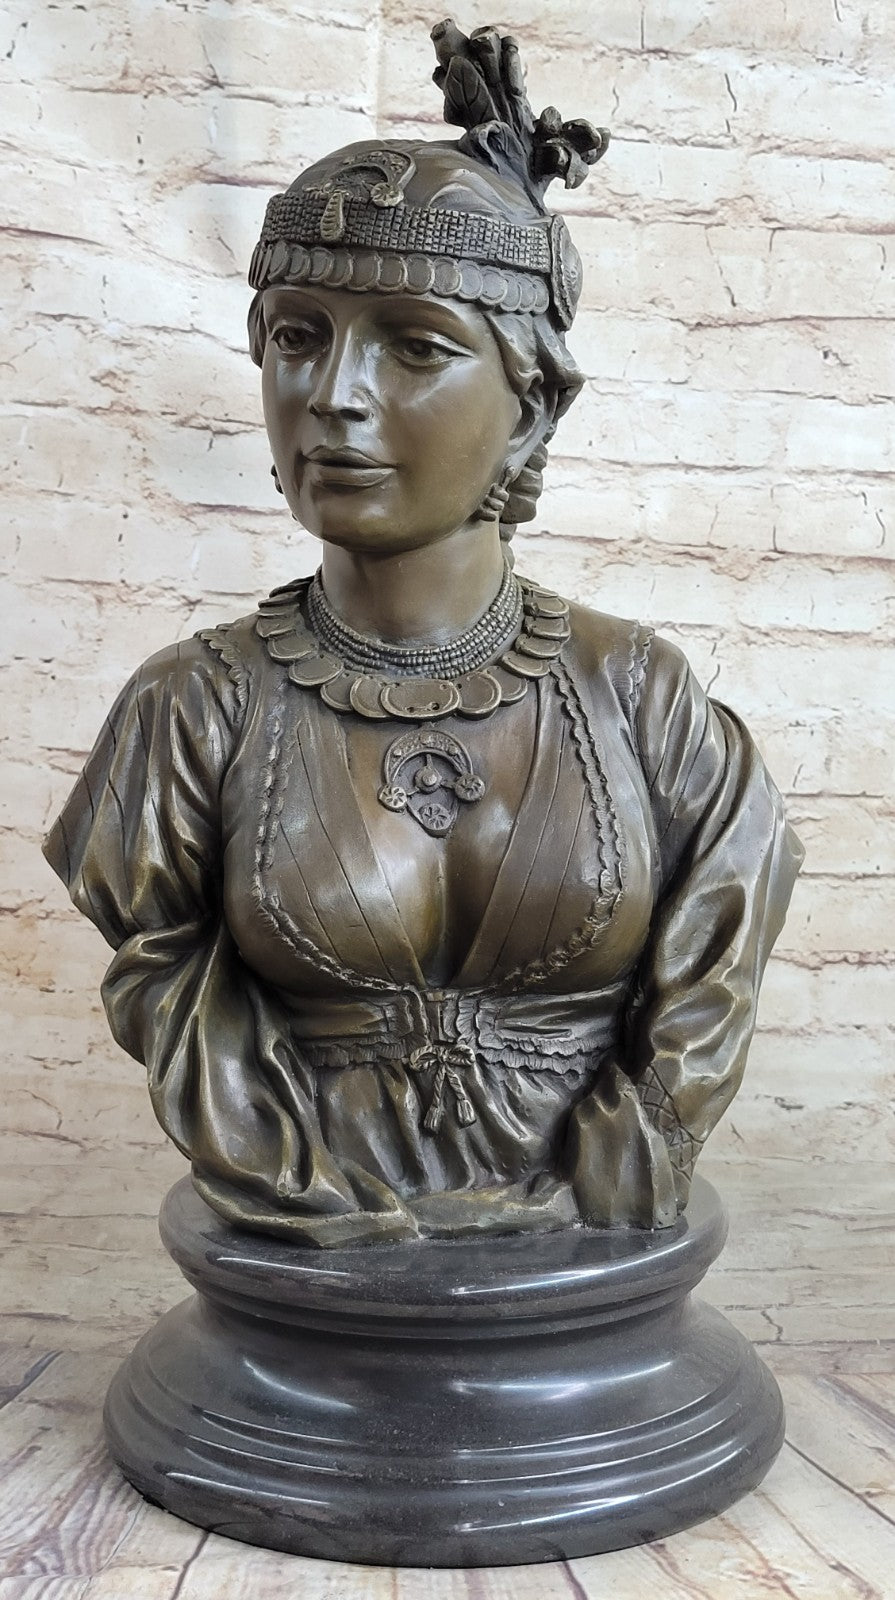 Handcrafted bronze sculpture SALE Bust Female Cordier By Caire Le Lady Egyption